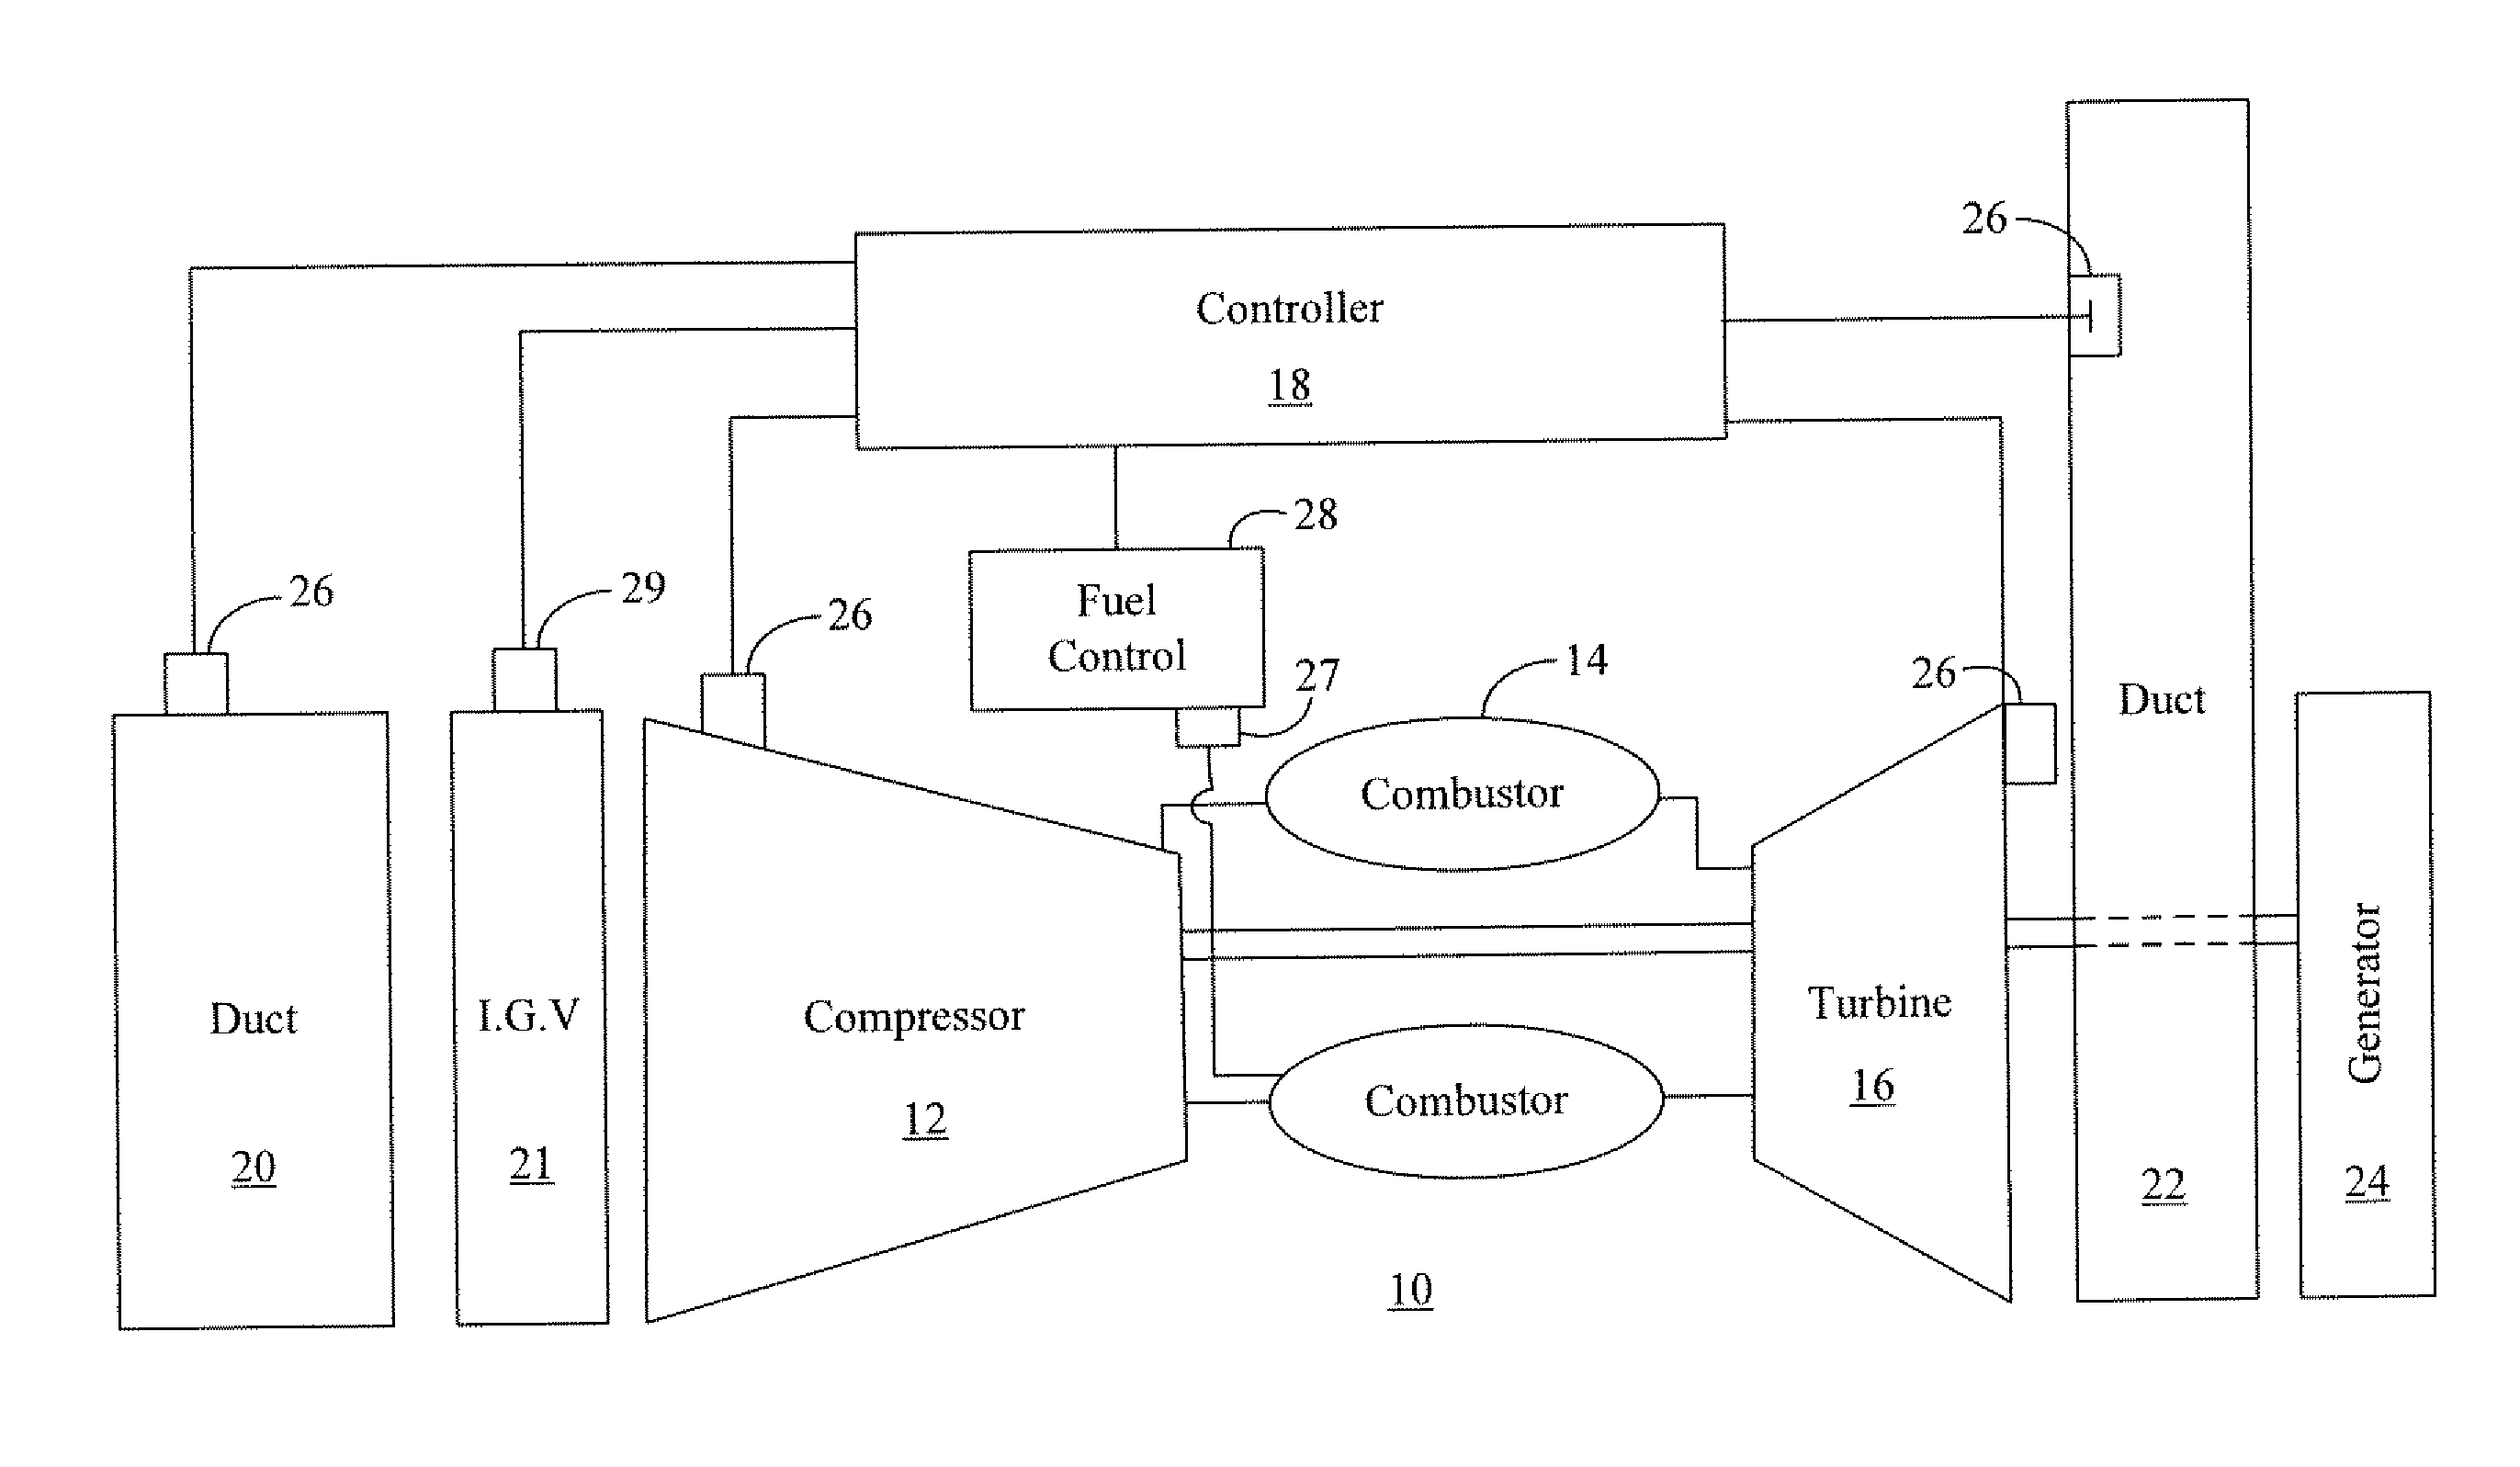 Methods and Systems for Model-Based Control of Gas Turbines